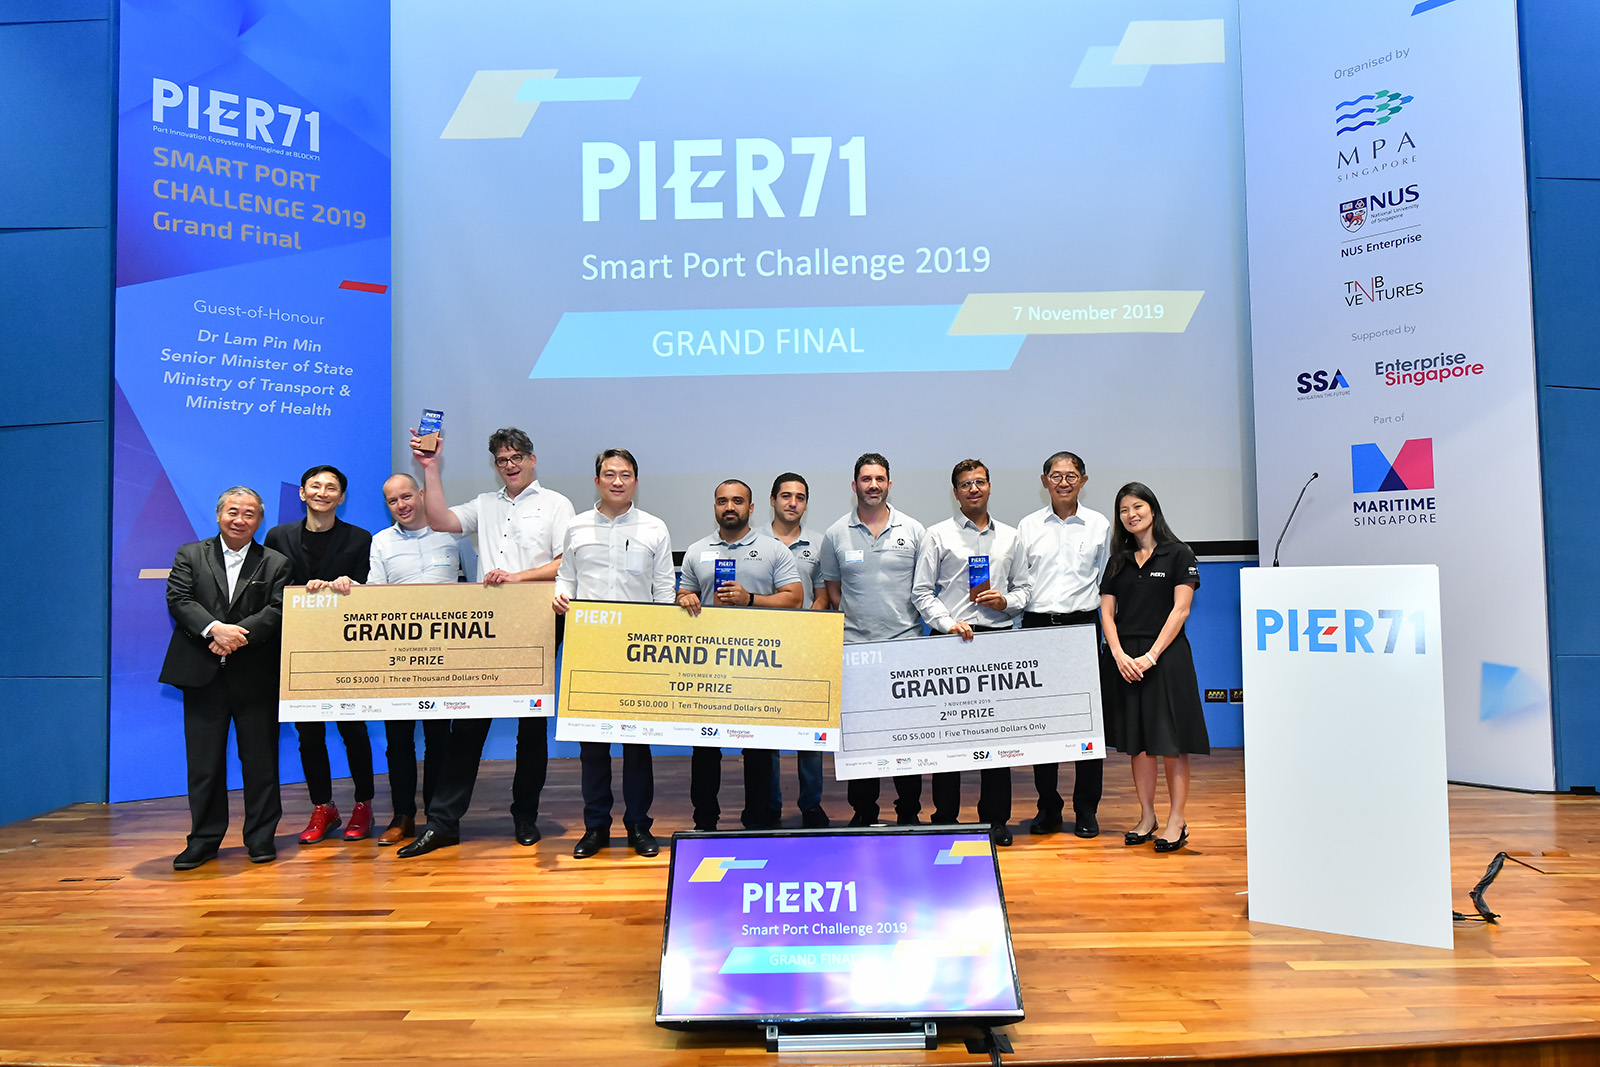 PIER71 Unveils Top Three Start-ups Reimagining the Maritime Industry at the 2019 Smart Port Challenge Grand Final